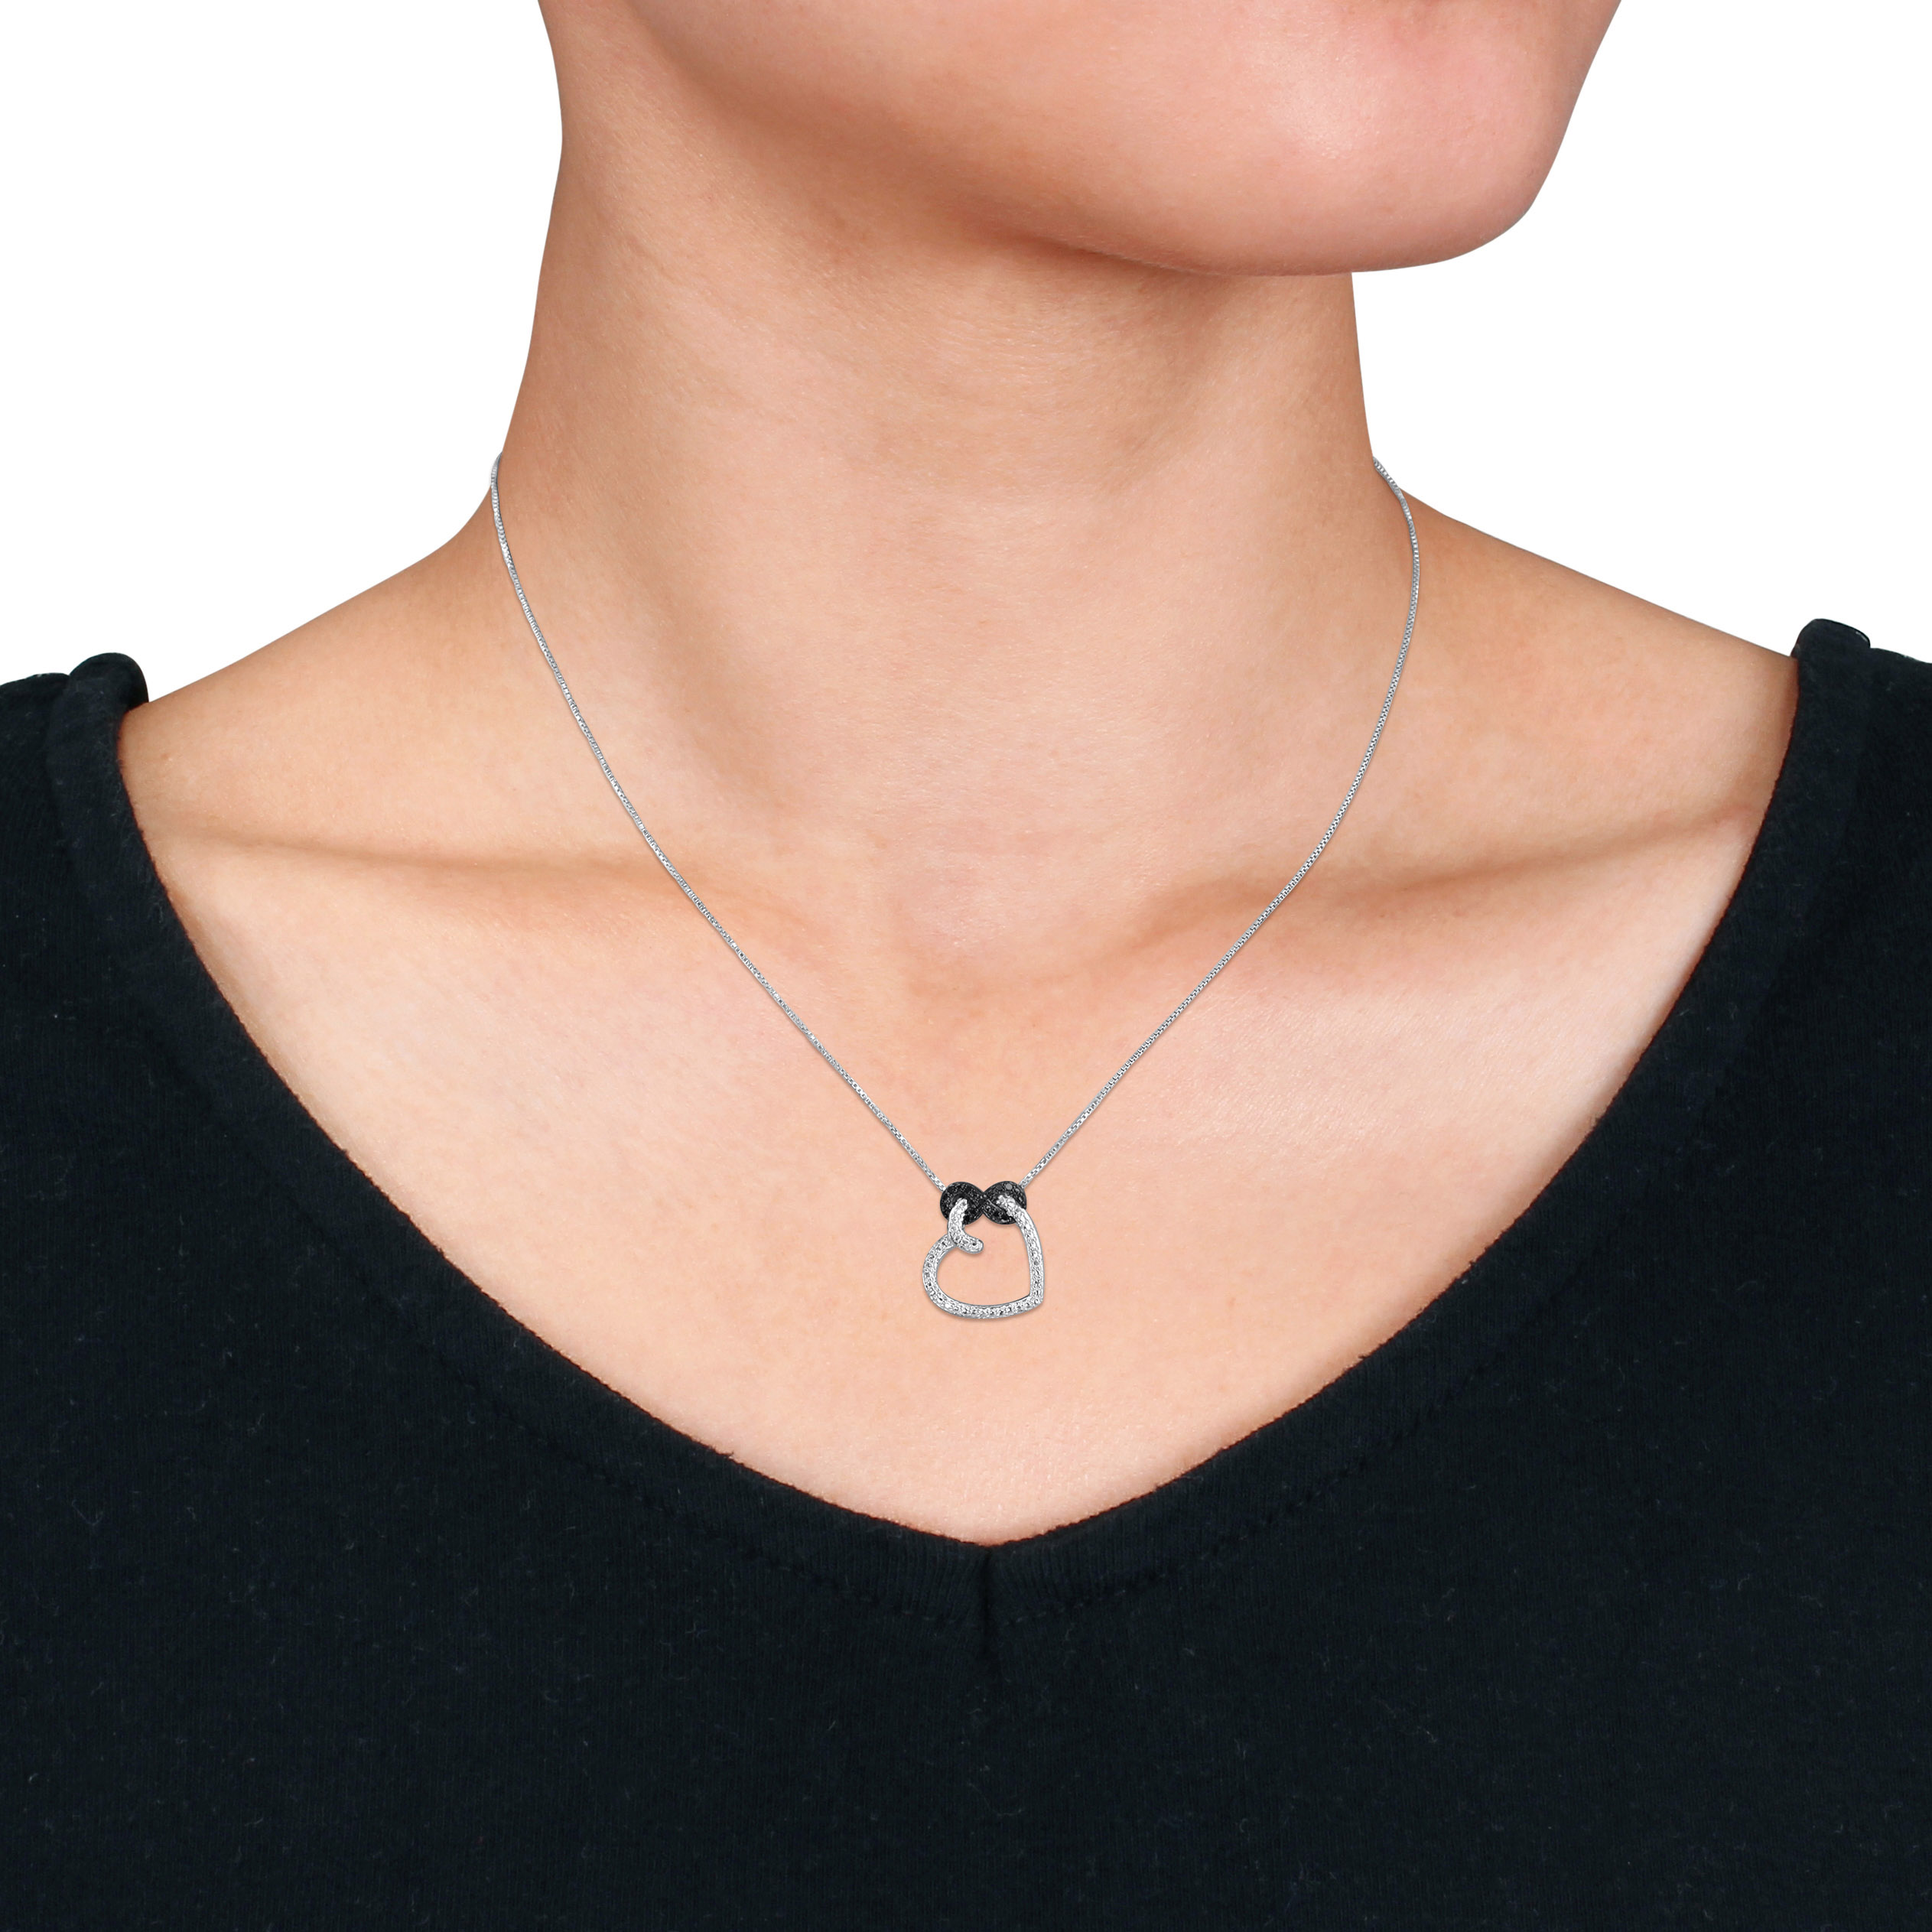 Black Diamond Accent Heart Infinity Pendant with Chain in Sterling Silver with Black Rhodium Plating